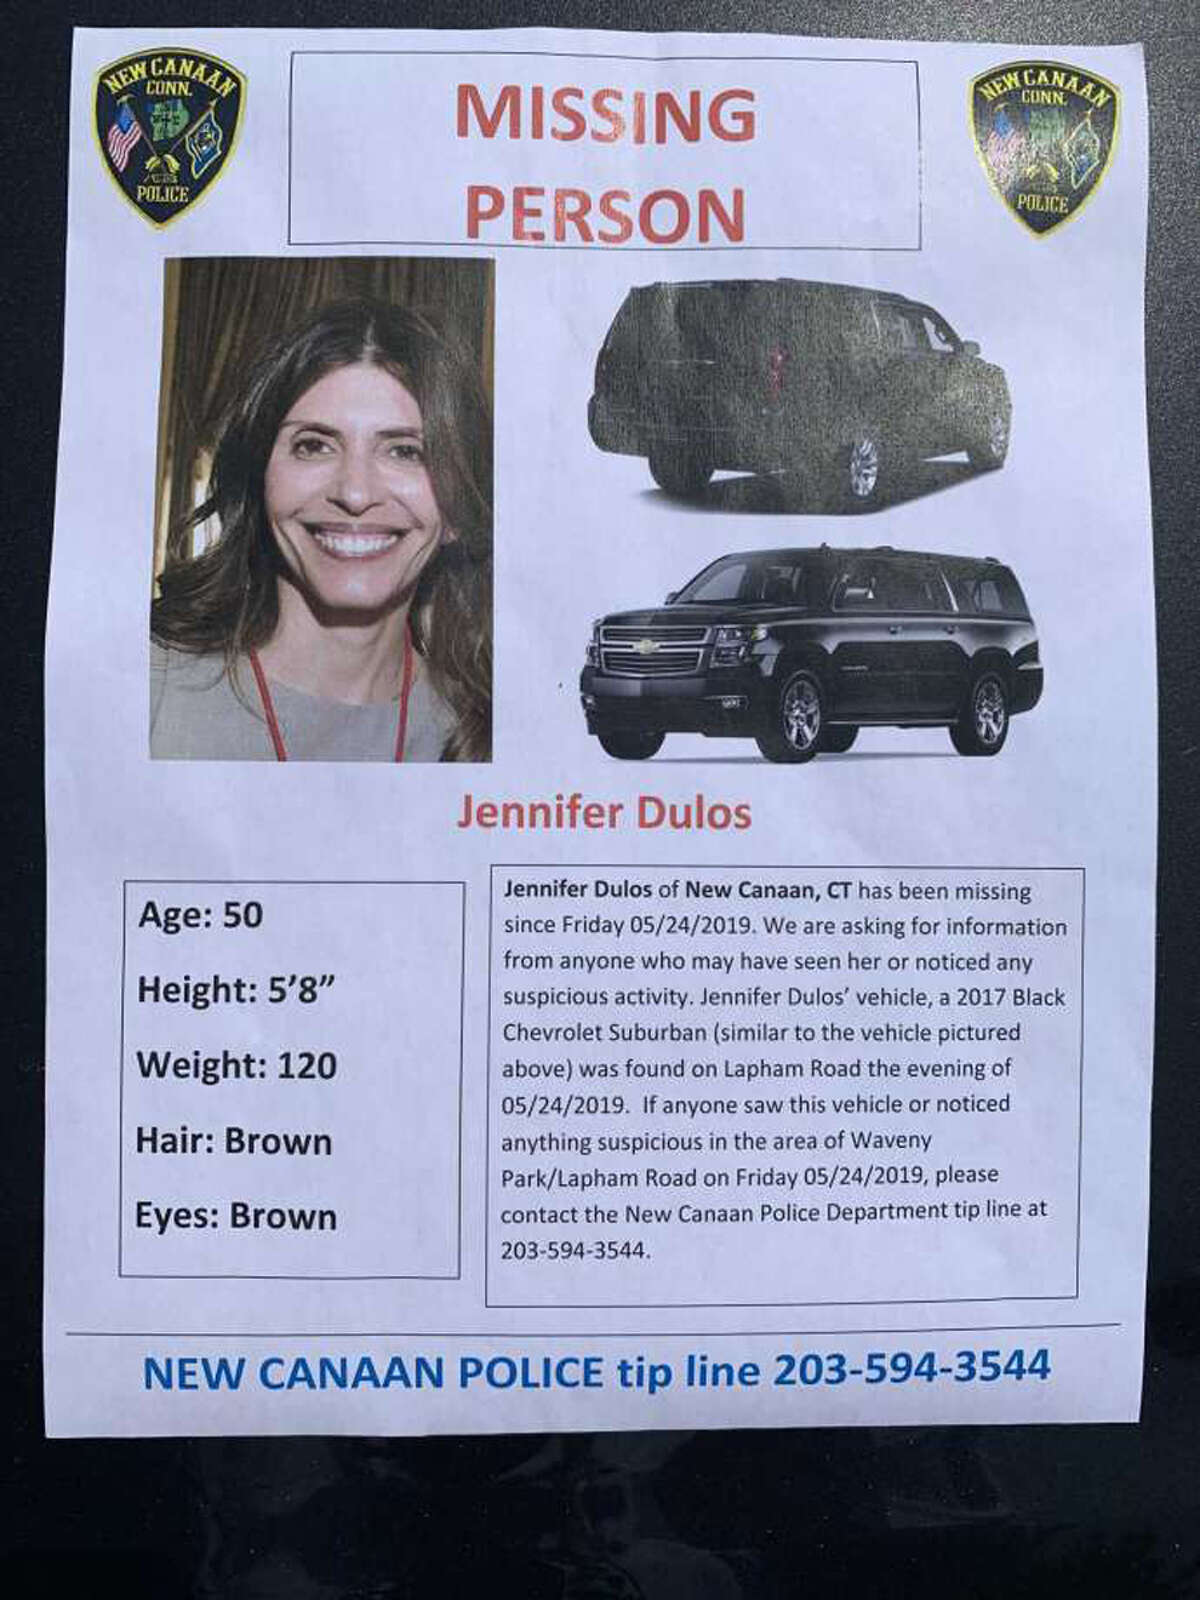 Police handed out missing persons flyers on Friday near where Jennifer Dulos’ SUV was found on Lapham Road last week. Photo: John Kovach / Hearst Connecticut Media